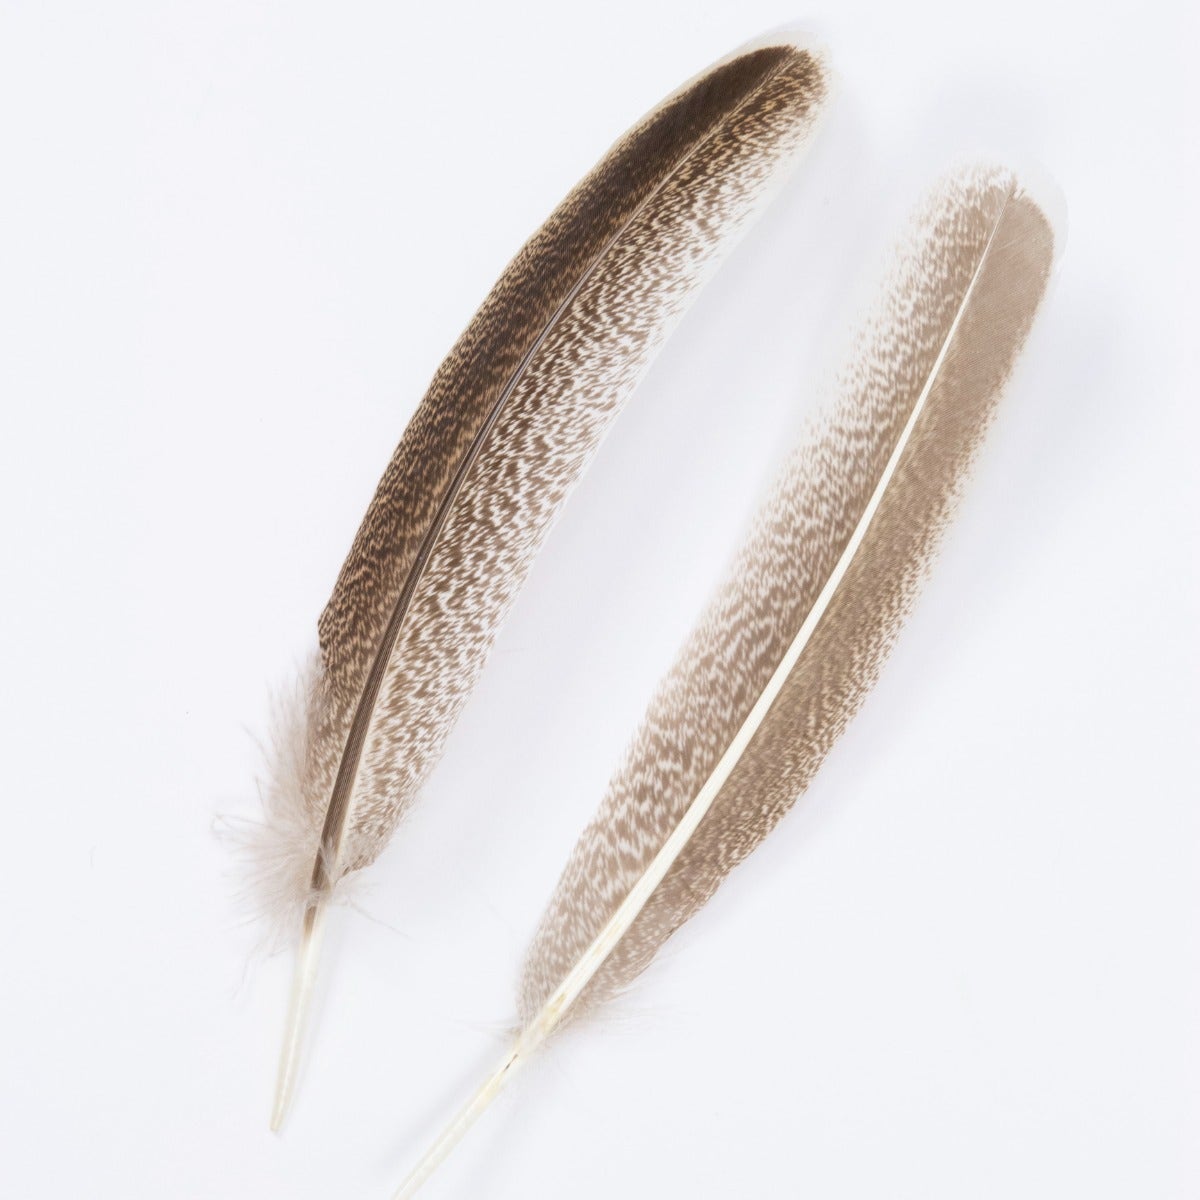 Cinnamon Turkey Quills Selected Feathers - Natural